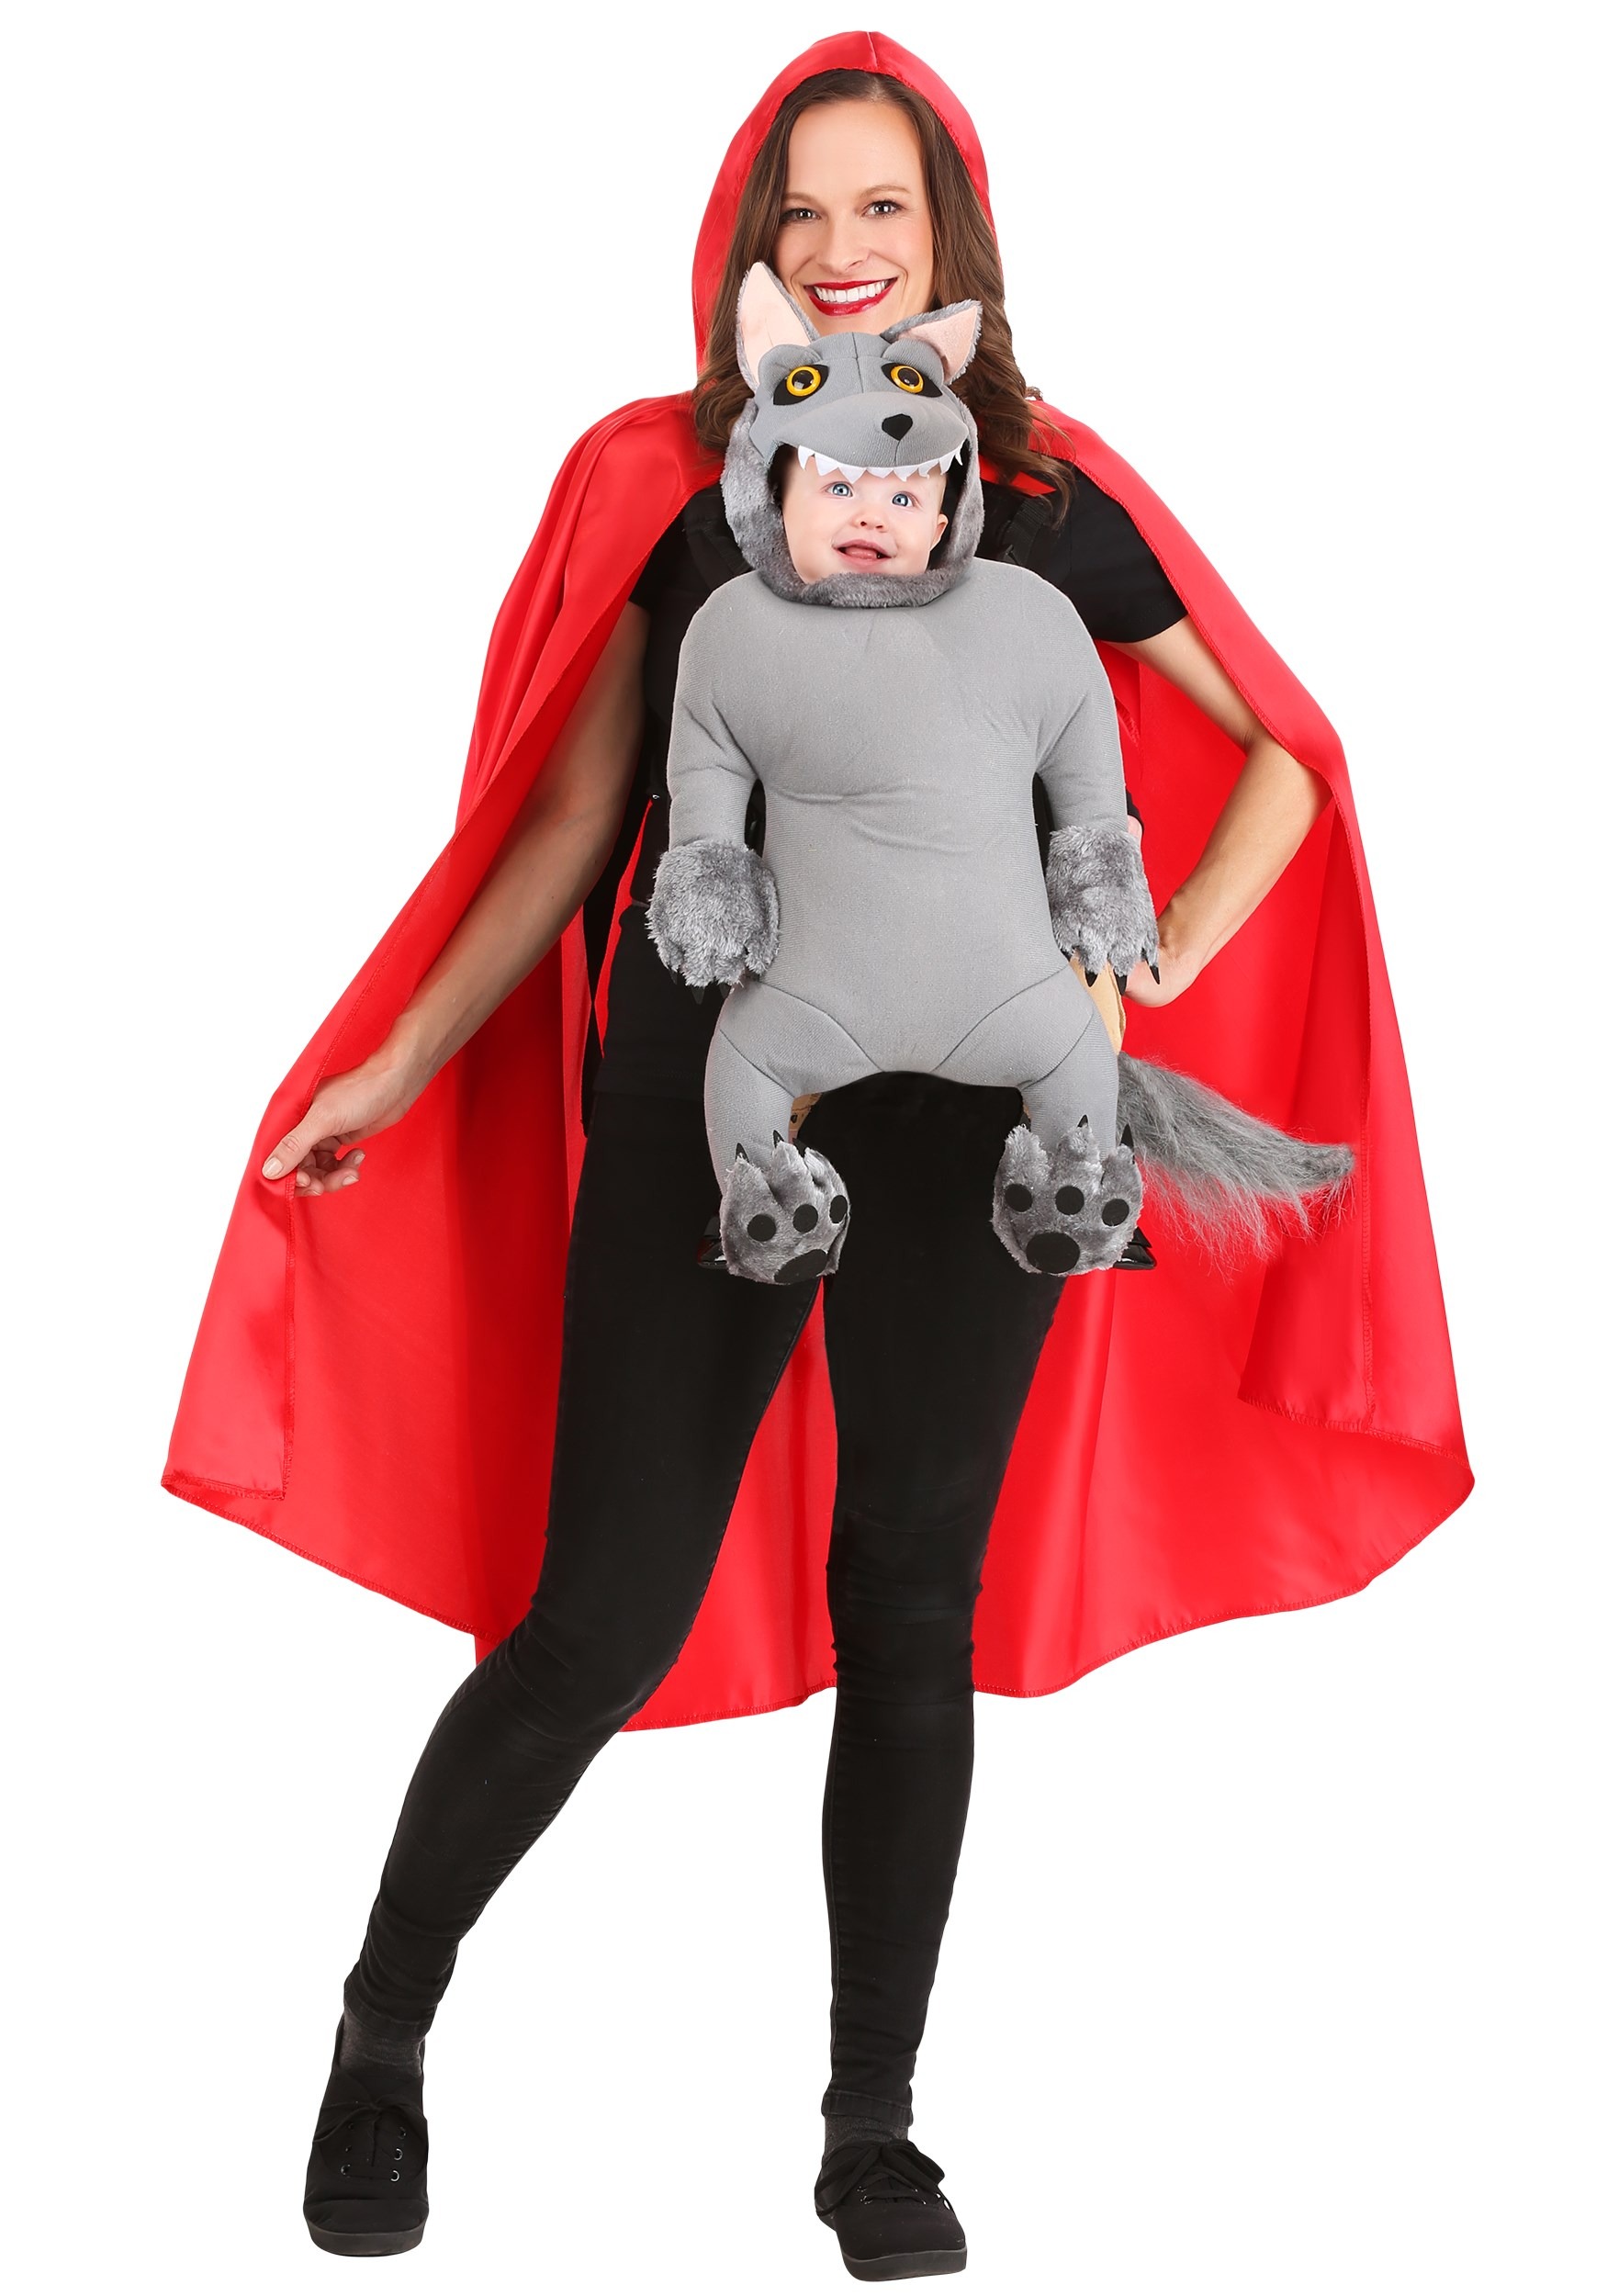 Little Red Riding Hood and Baby Wolf Costume